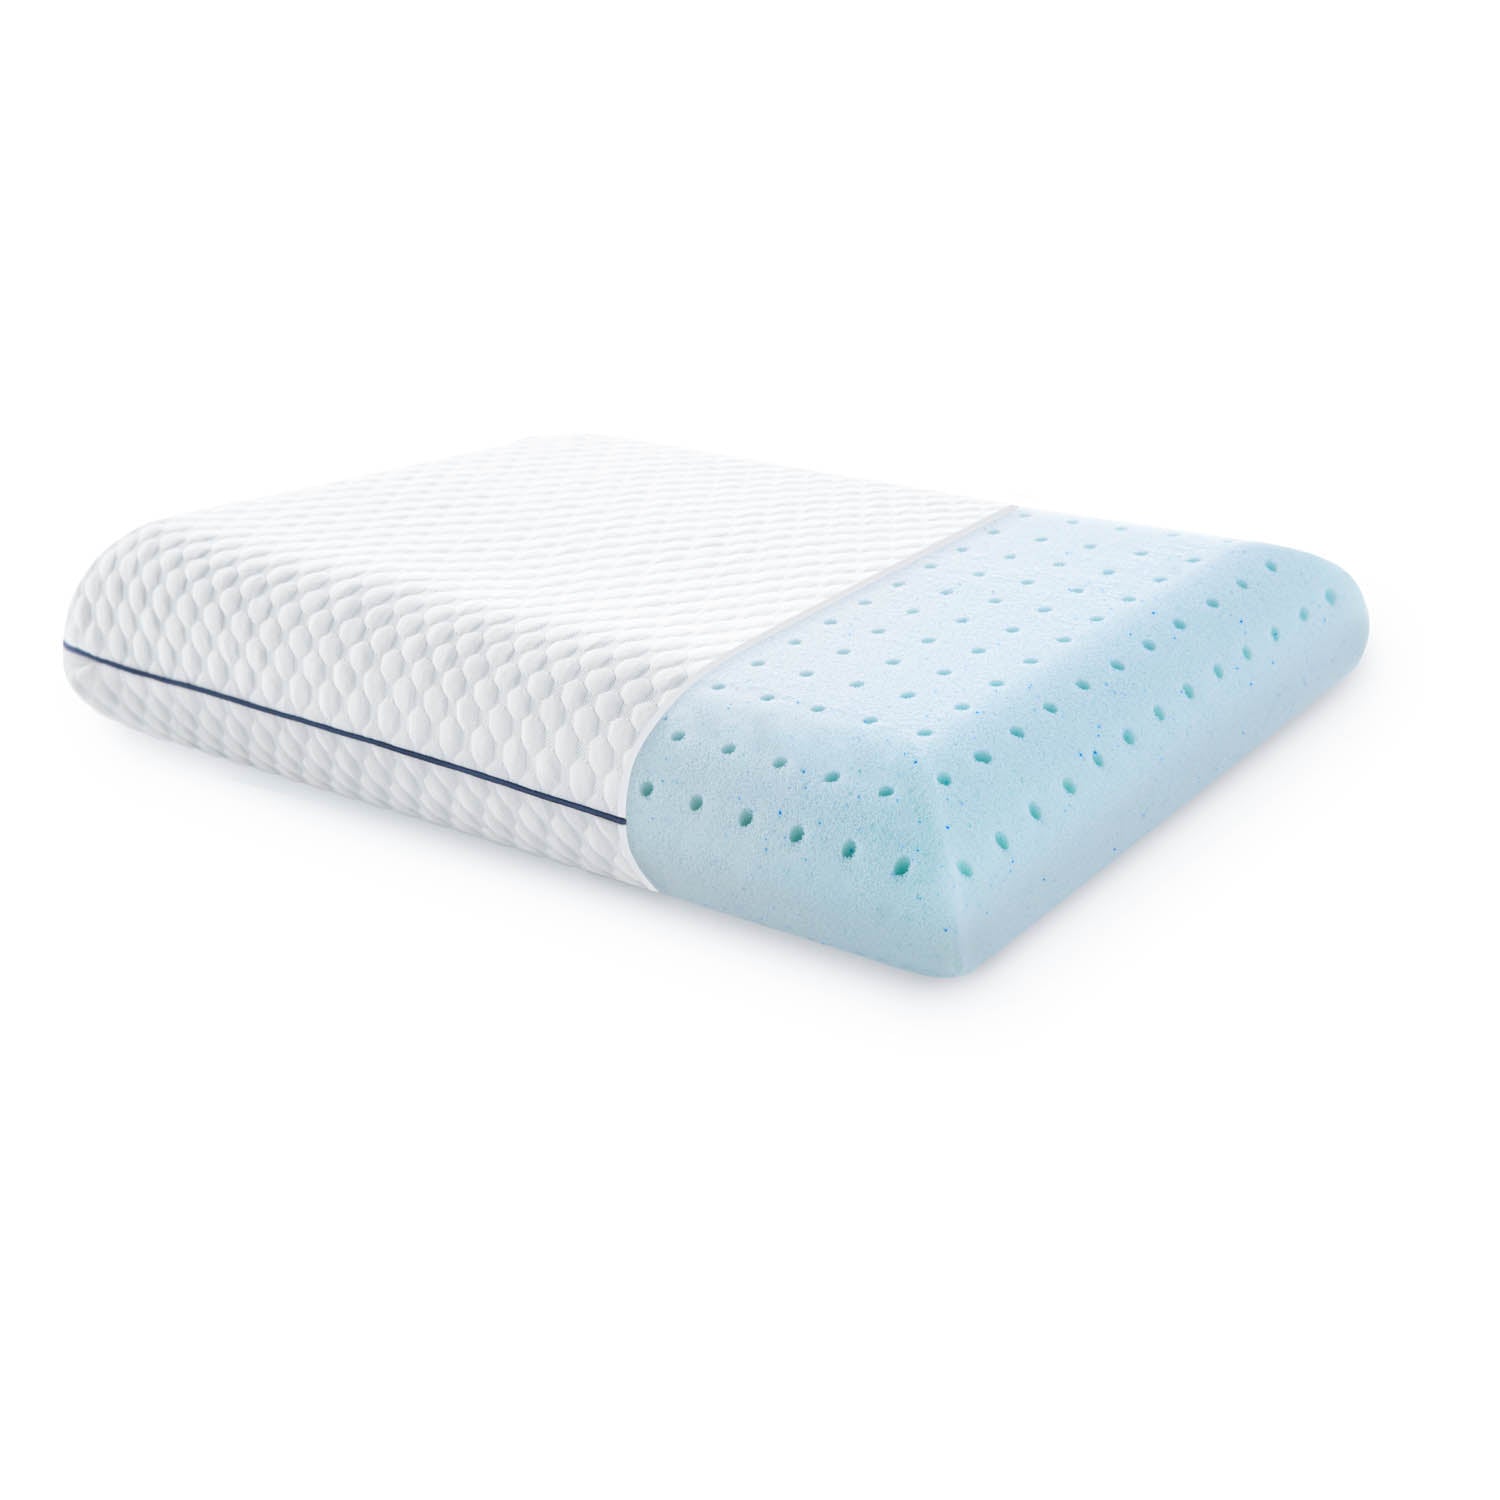 Superior Shredded Memory Foam Pillow with Cover, Size: Queen